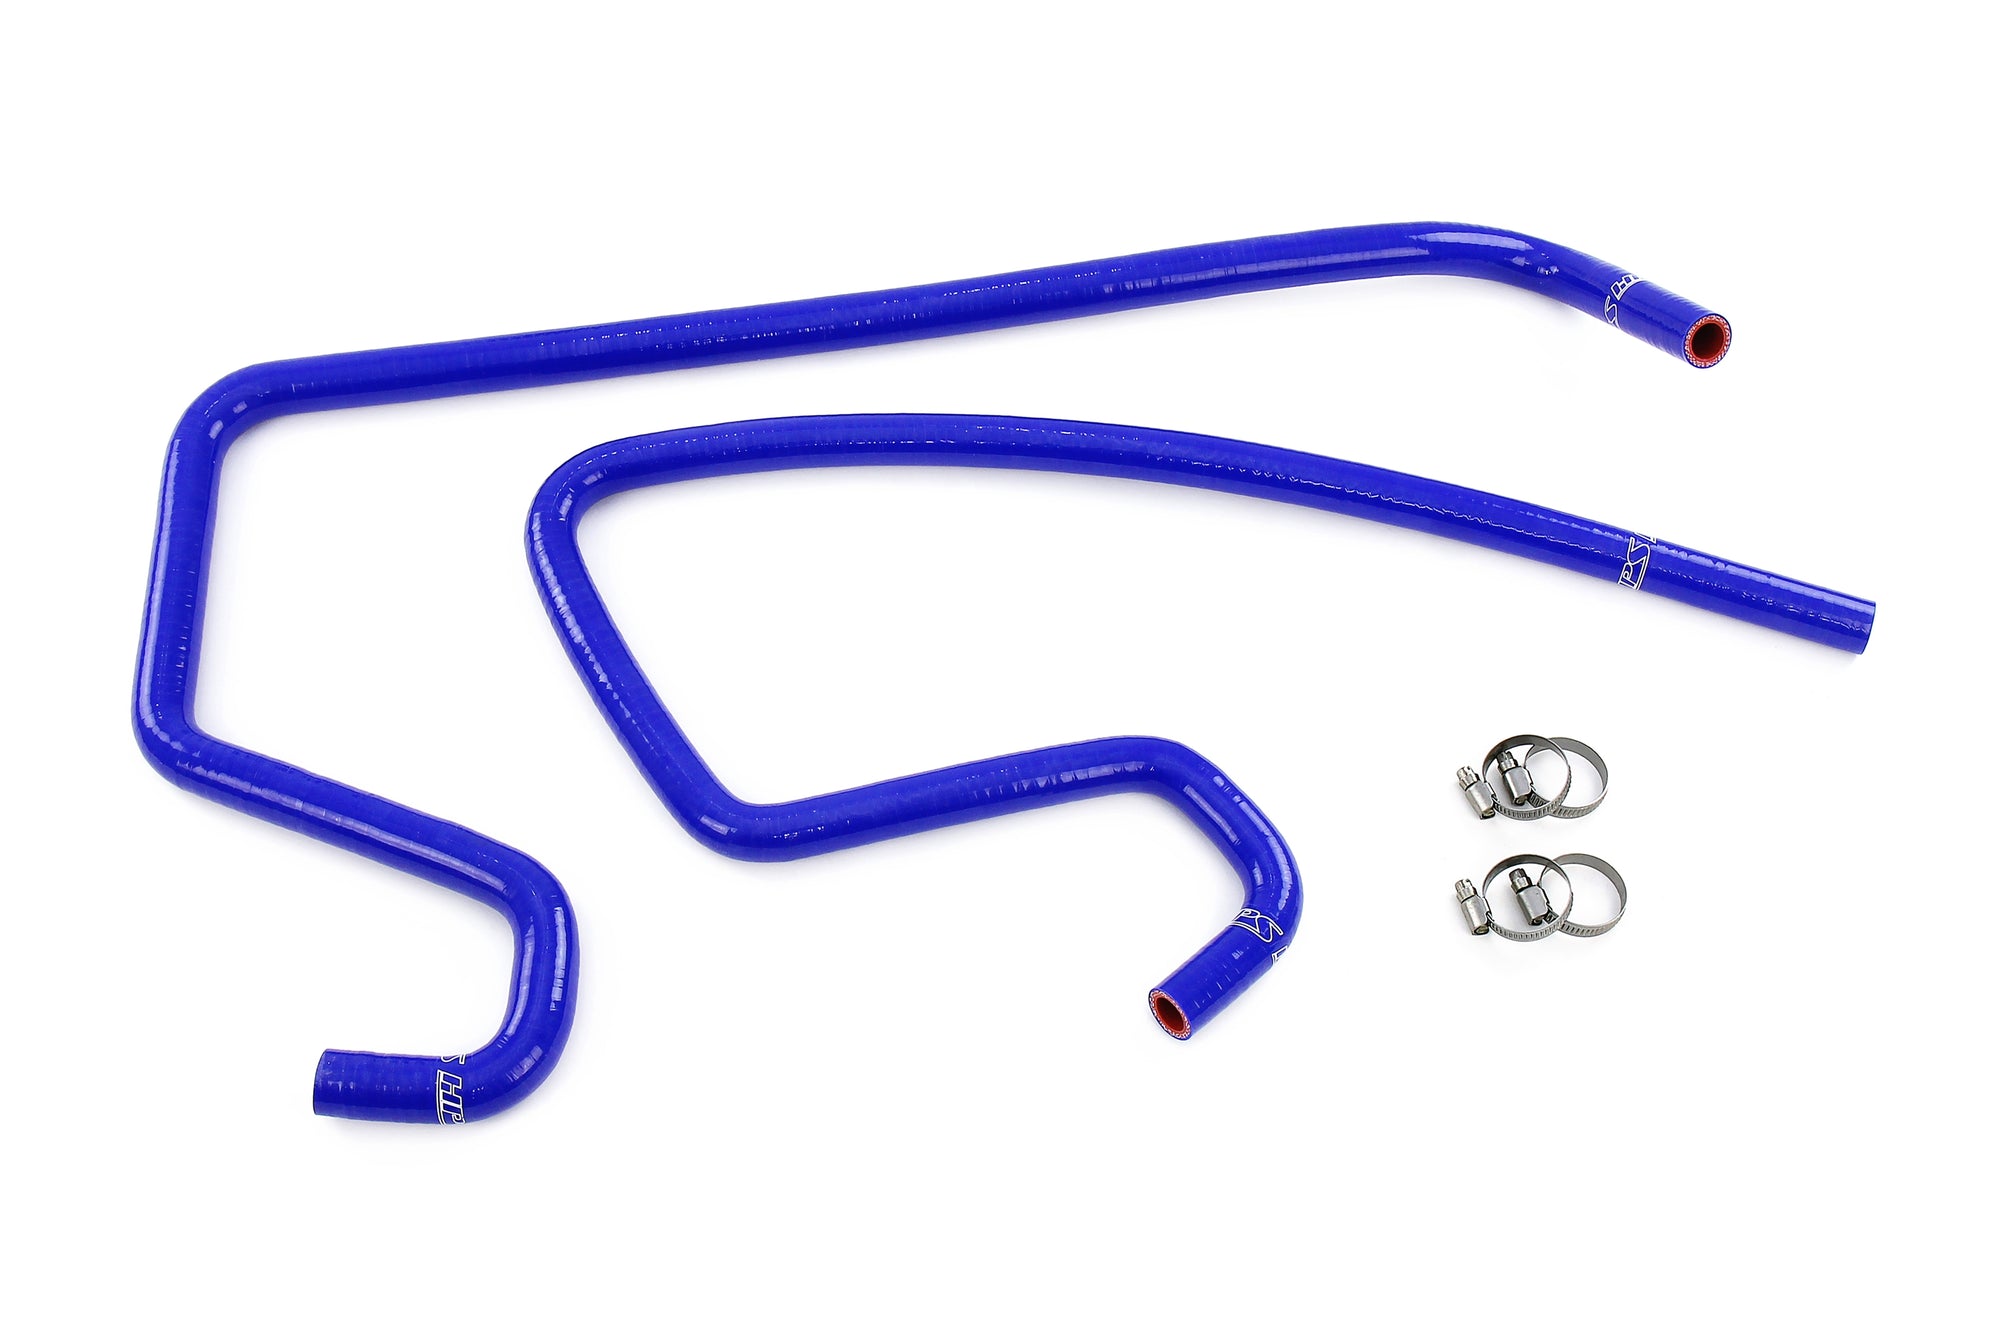 HPS Blue Silicone Heater Coolant Hoses Jeep 1999-2001 Cherokee XJ Mailman truck 4.0L Right Hand Drive 57-2114-BLUE